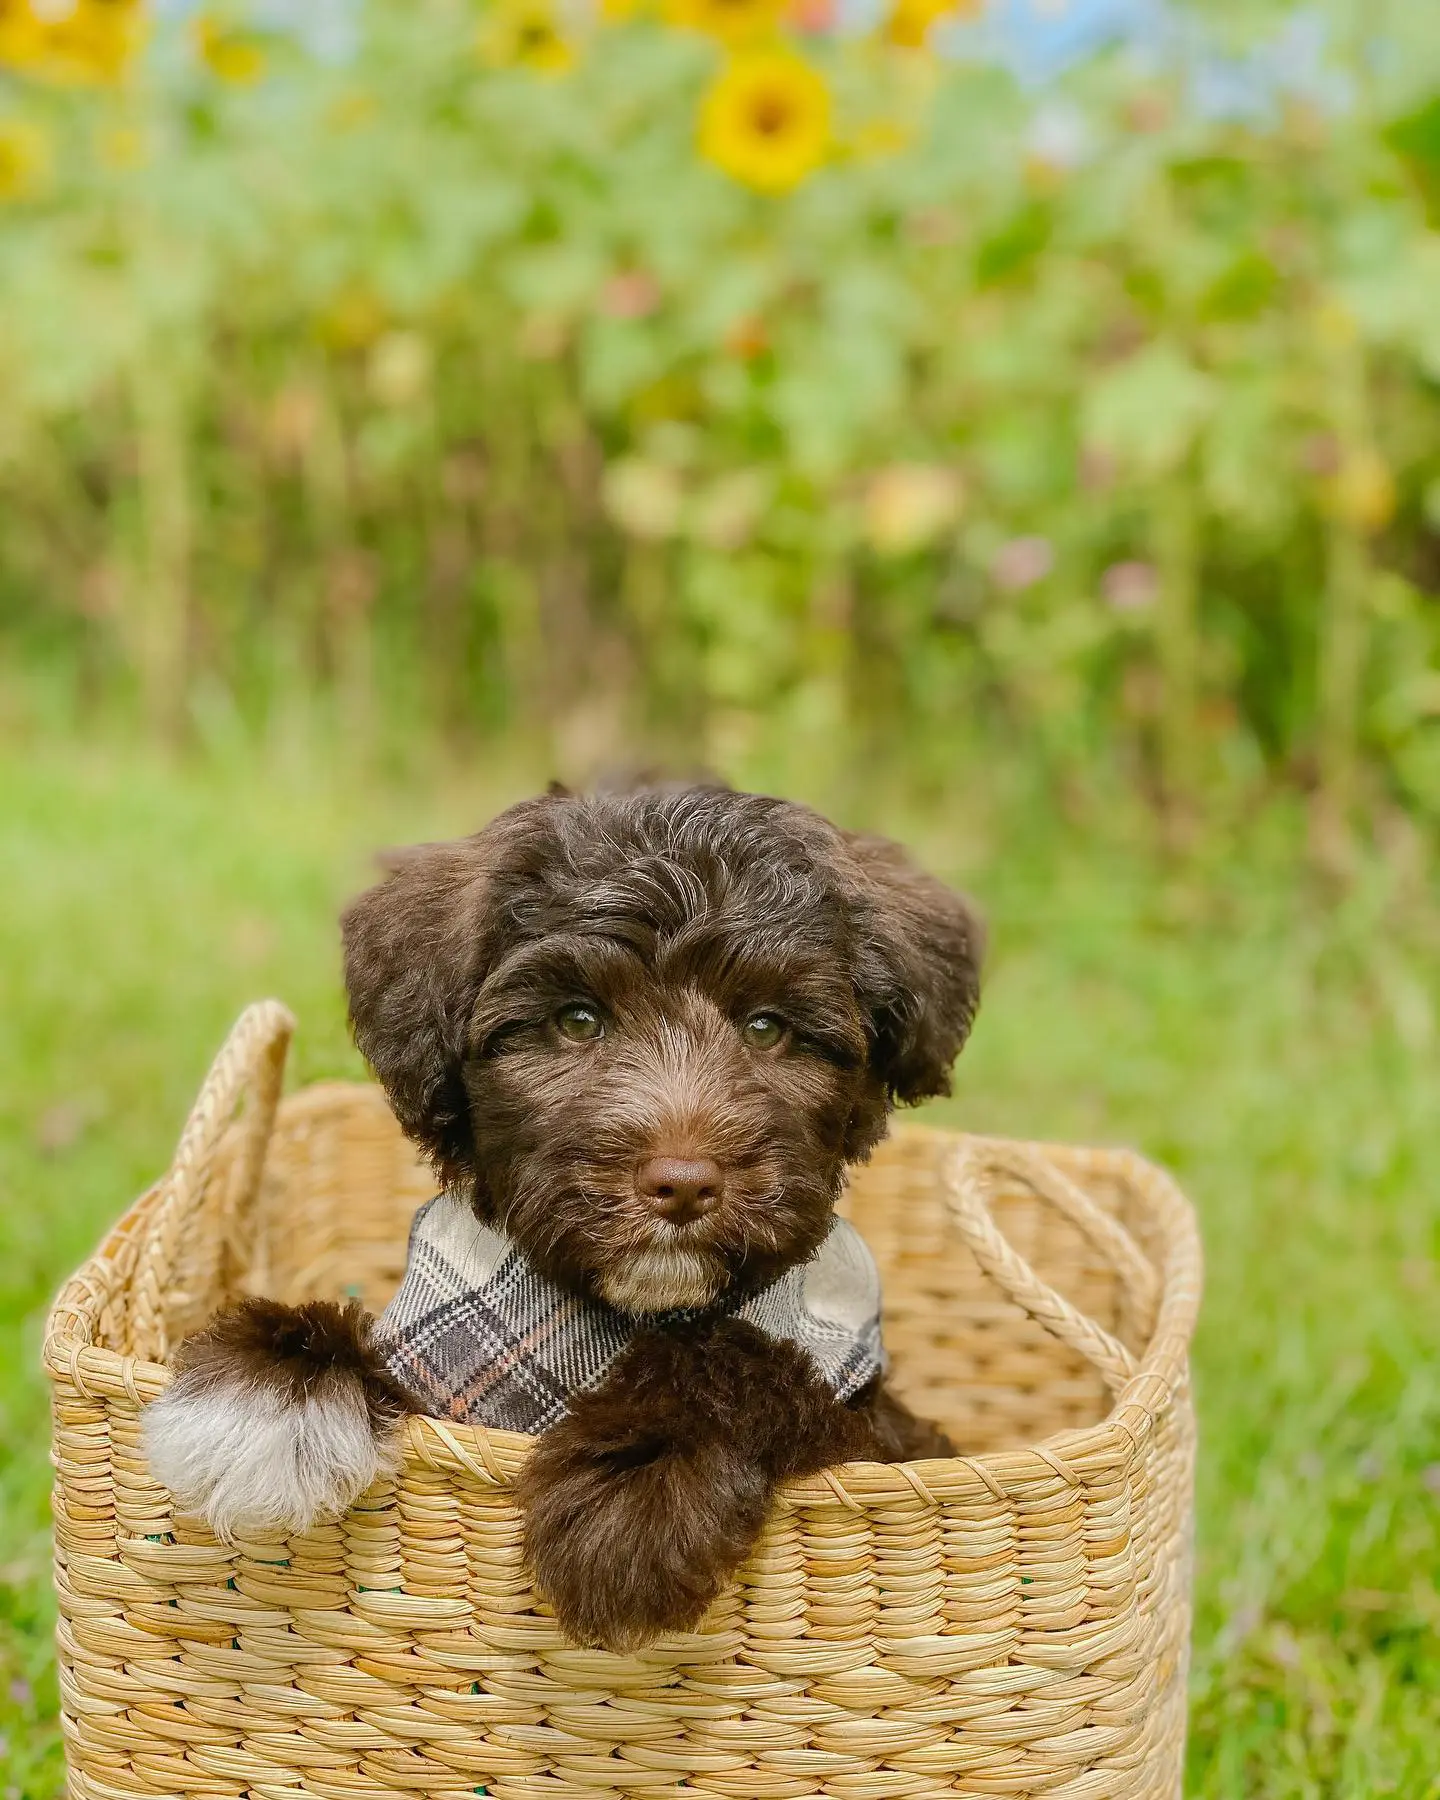 miniature f1bb chocolate English teddy bear goldendoodle puppy in a wicker basket